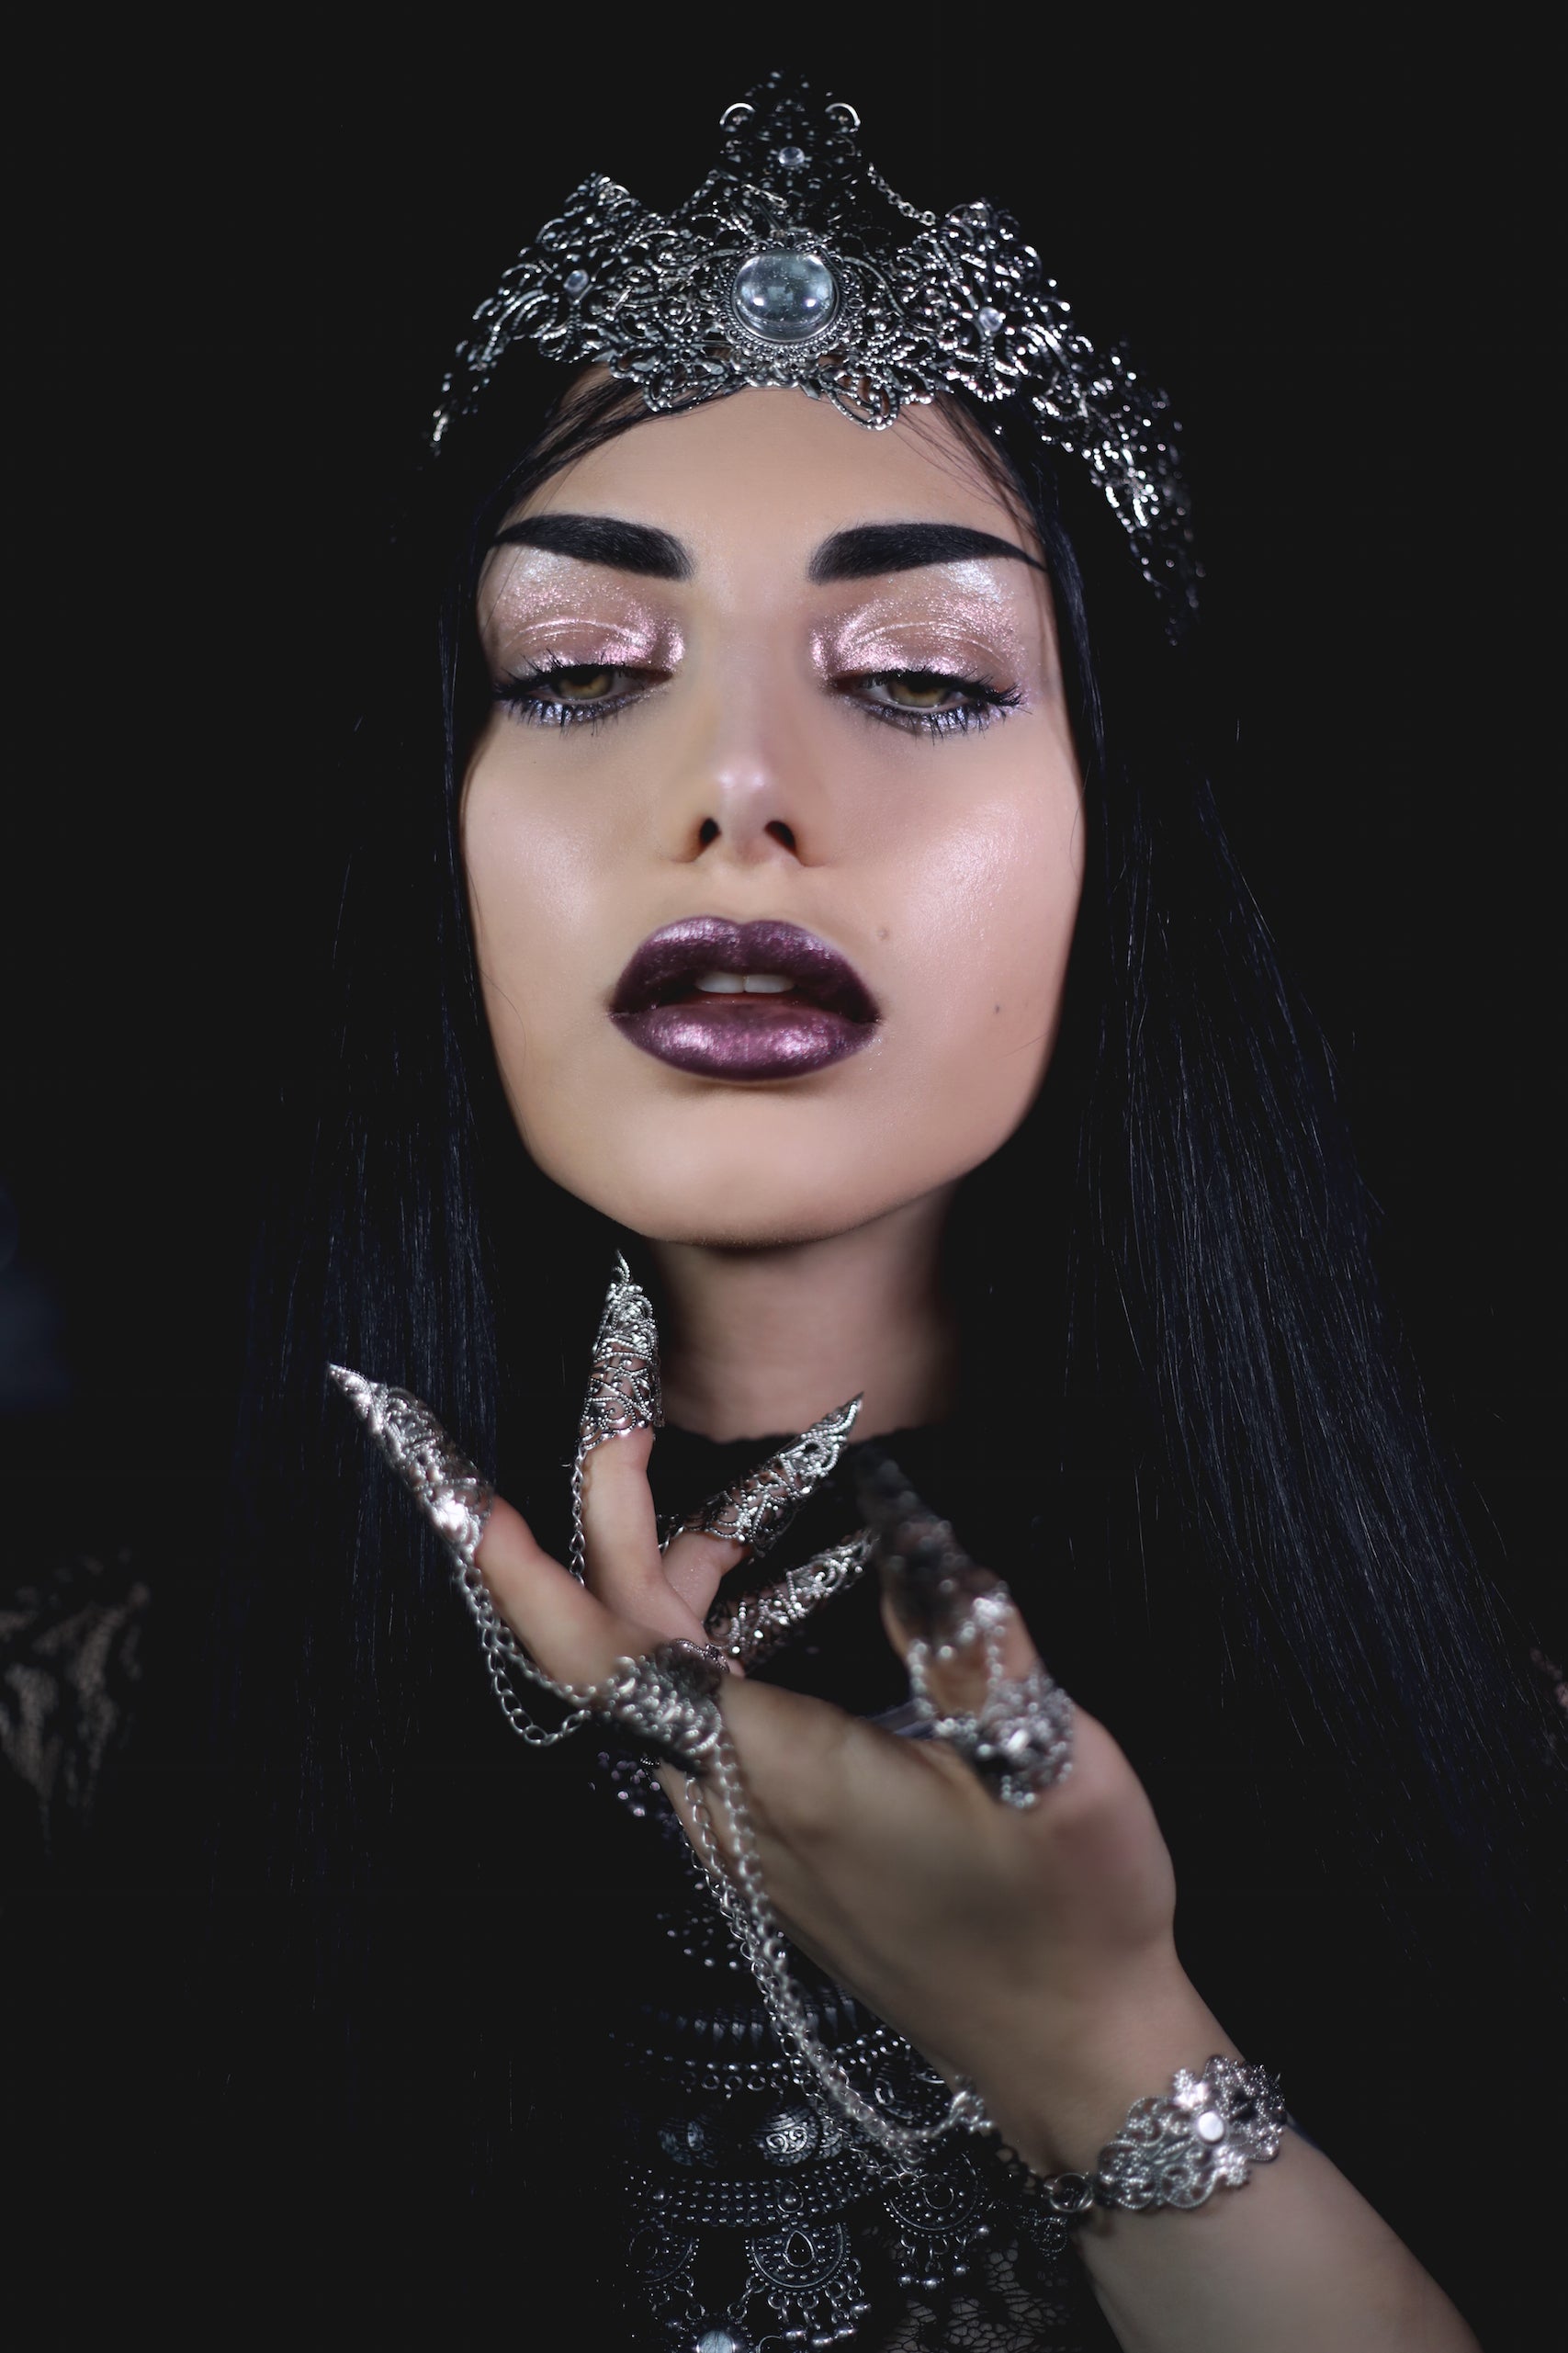 Elegant woman with a gothic beauty aesthetic wearing an ornate silver tiara and matching claw rings, connected by fine chains, embodying a vampire goth style with dark makeup and a mysterious allure.